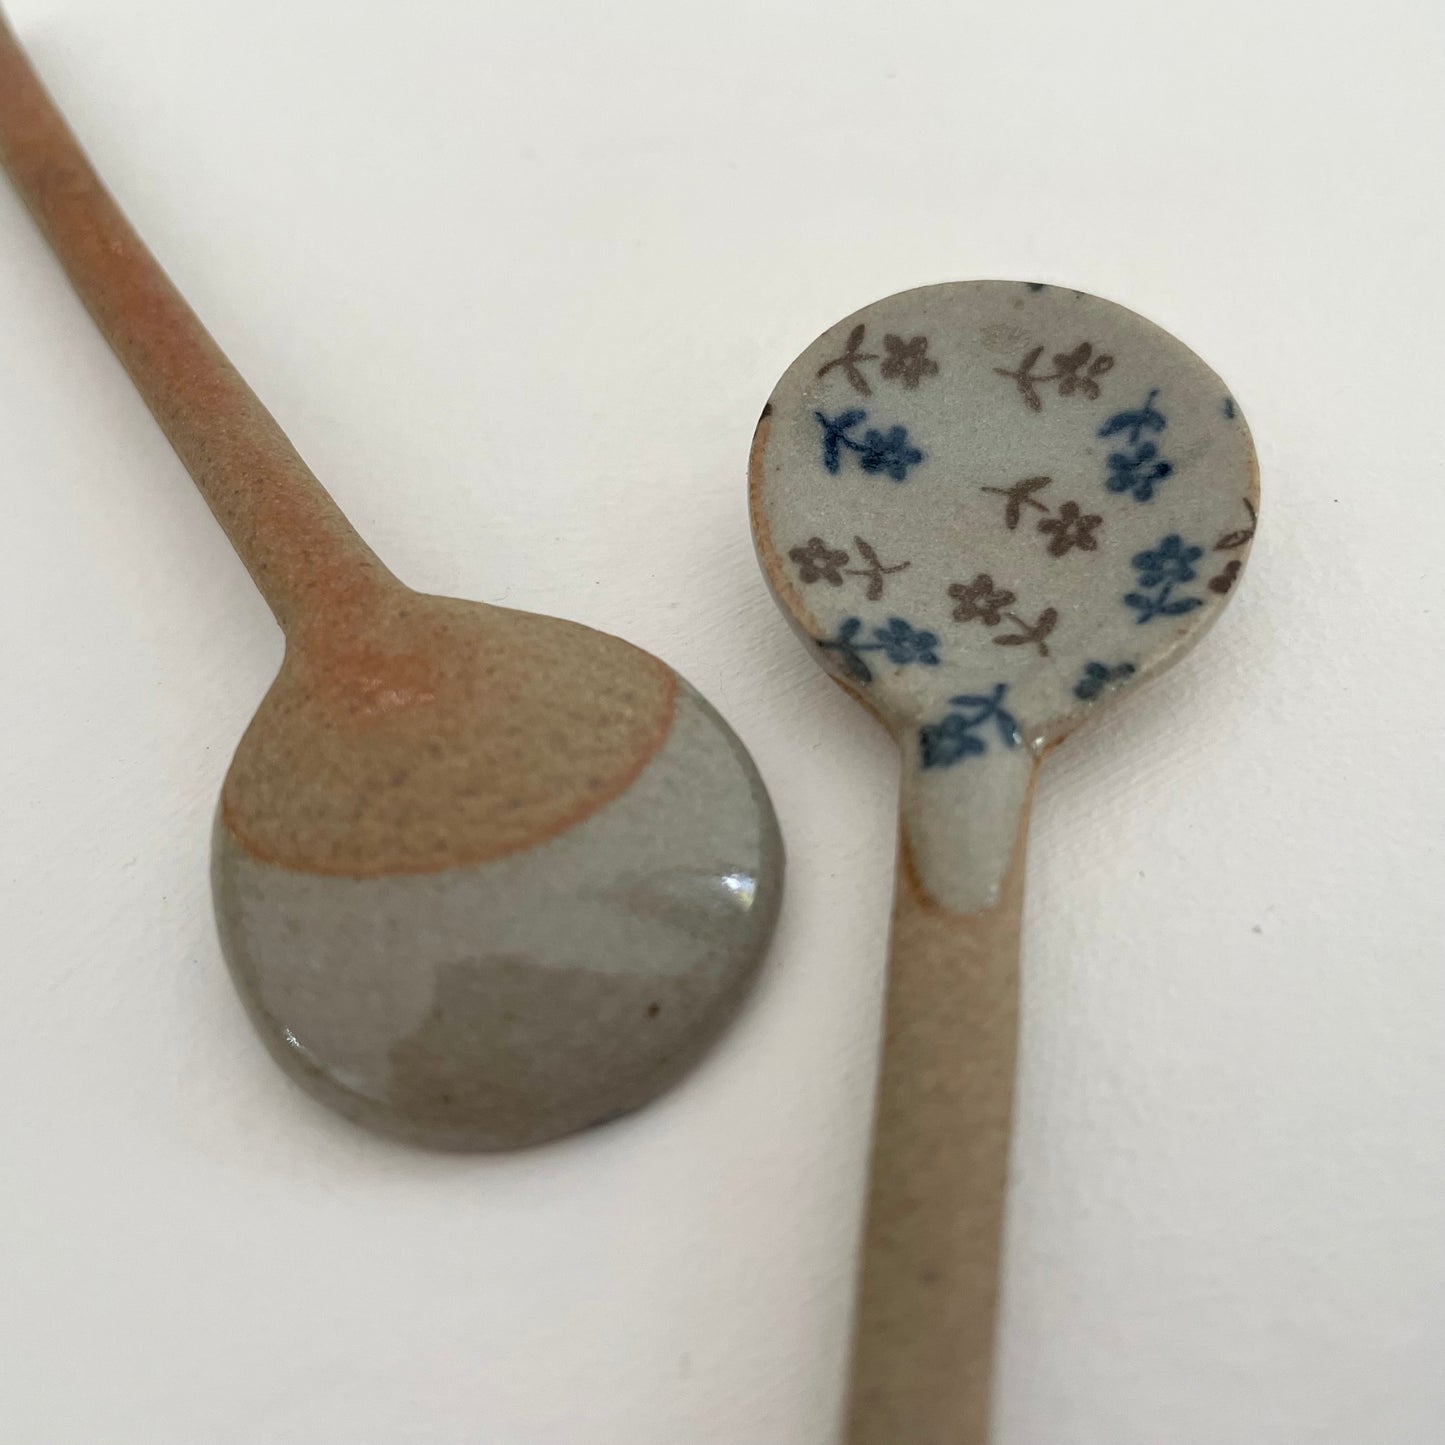 handmade ditsy floral printed mini pottery spoon for coffee or tea